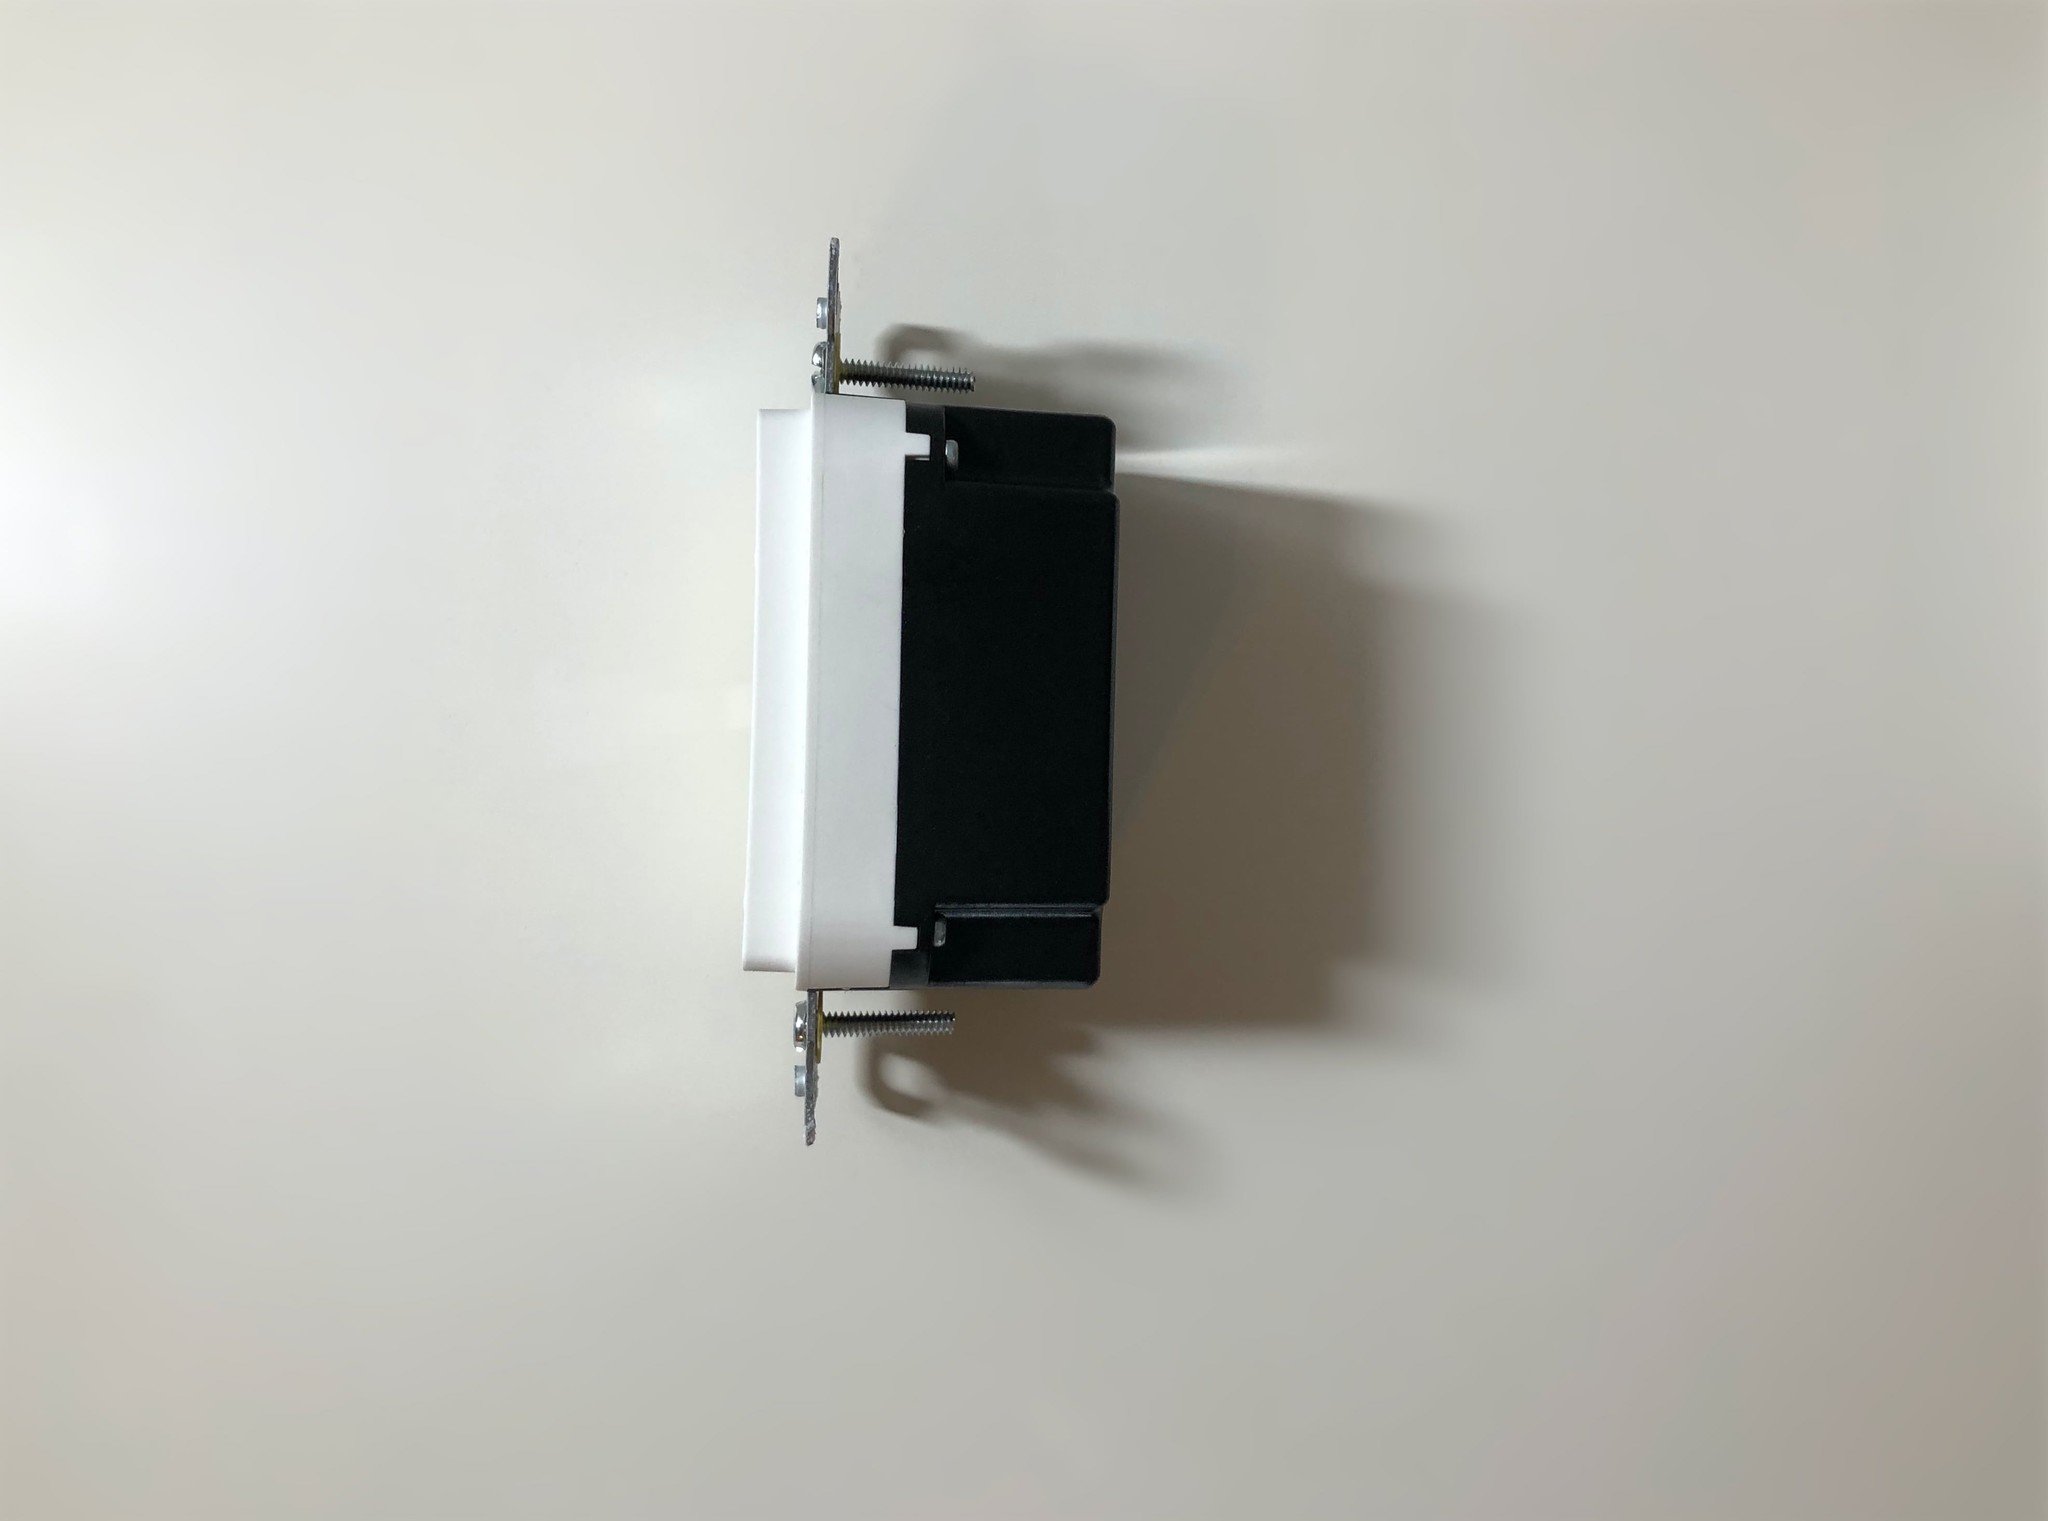 Connectsense Smart Inwall Outlet Side